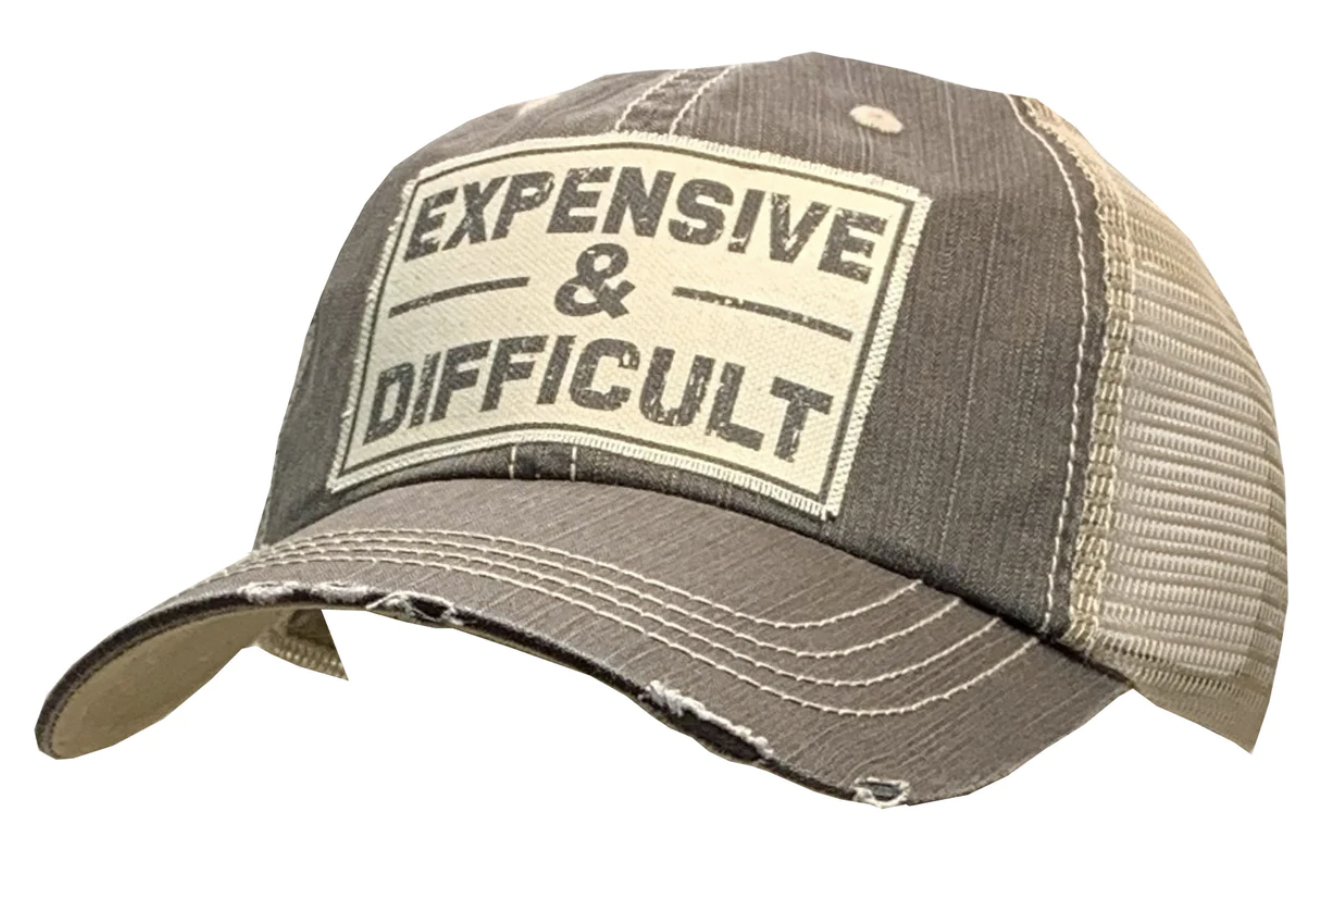 EXPENSIVE AND DIFFICULT DISTRESSED HAT